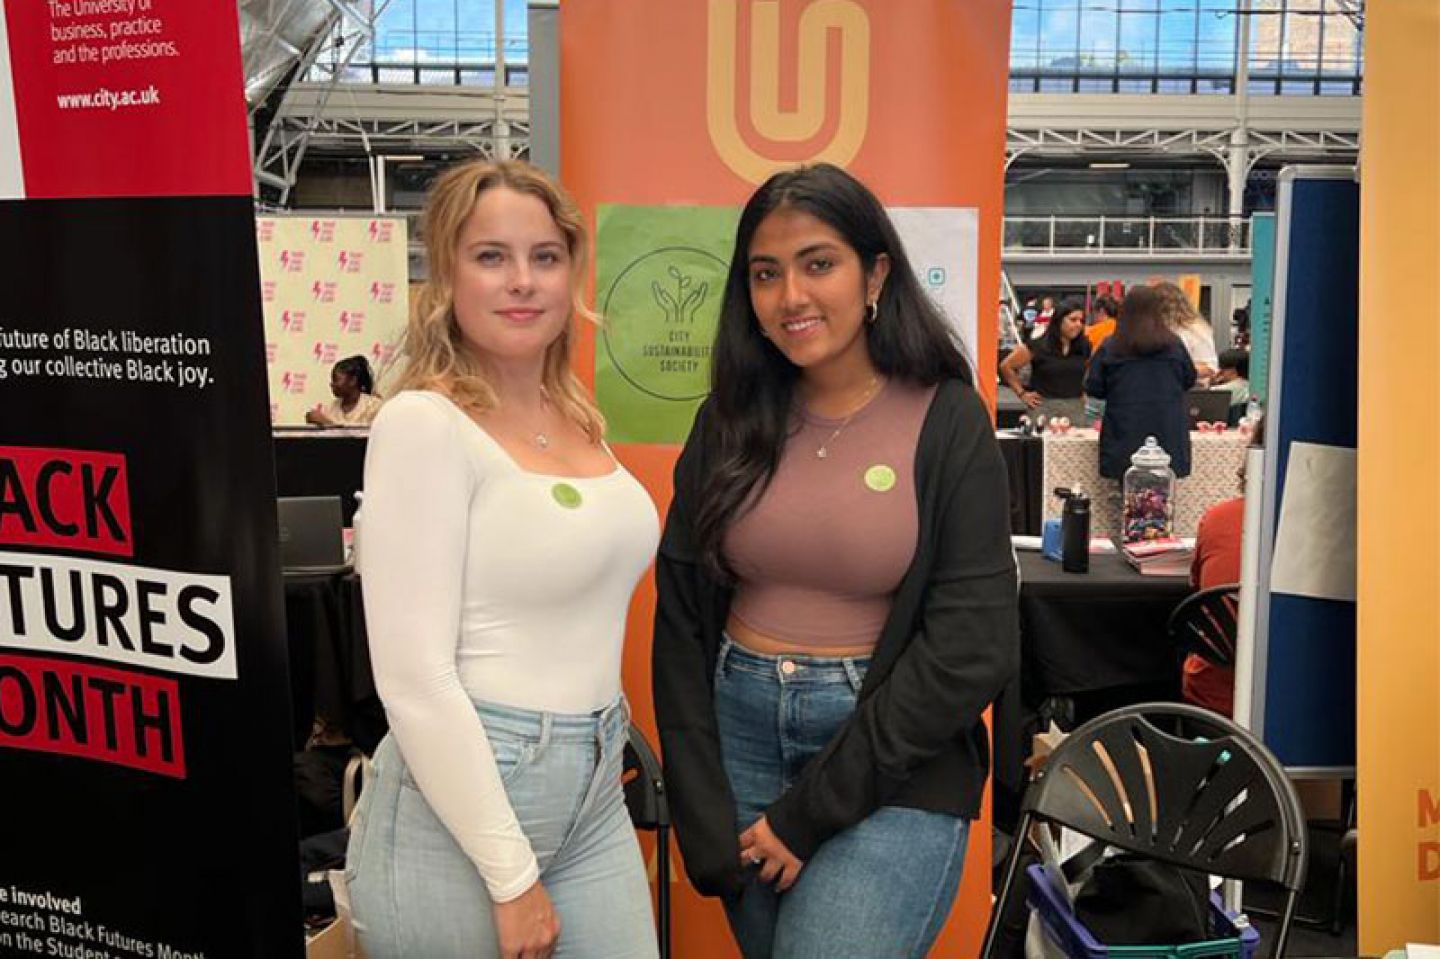 City Sustainability Society Co-Presidents at the Student Society Fair in Welcome Week. Left: Danielle Arbeiter (LLB in Law). Right: Ananya Pahwa (BSc in Business Management).